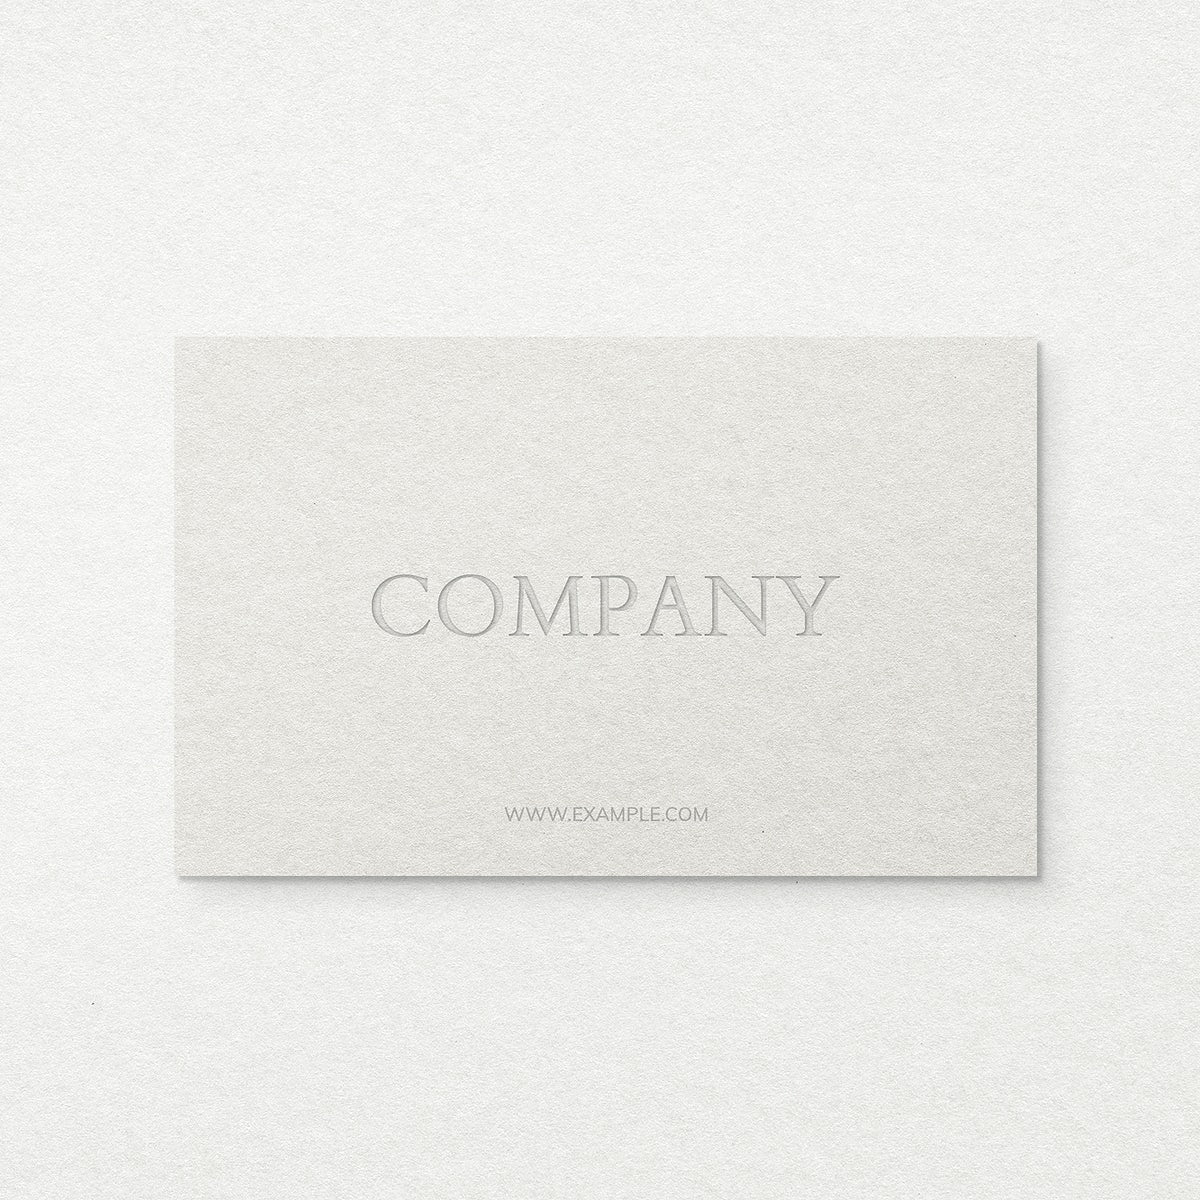 Free Luxury Business Card Mockup Psd In Gray Tone